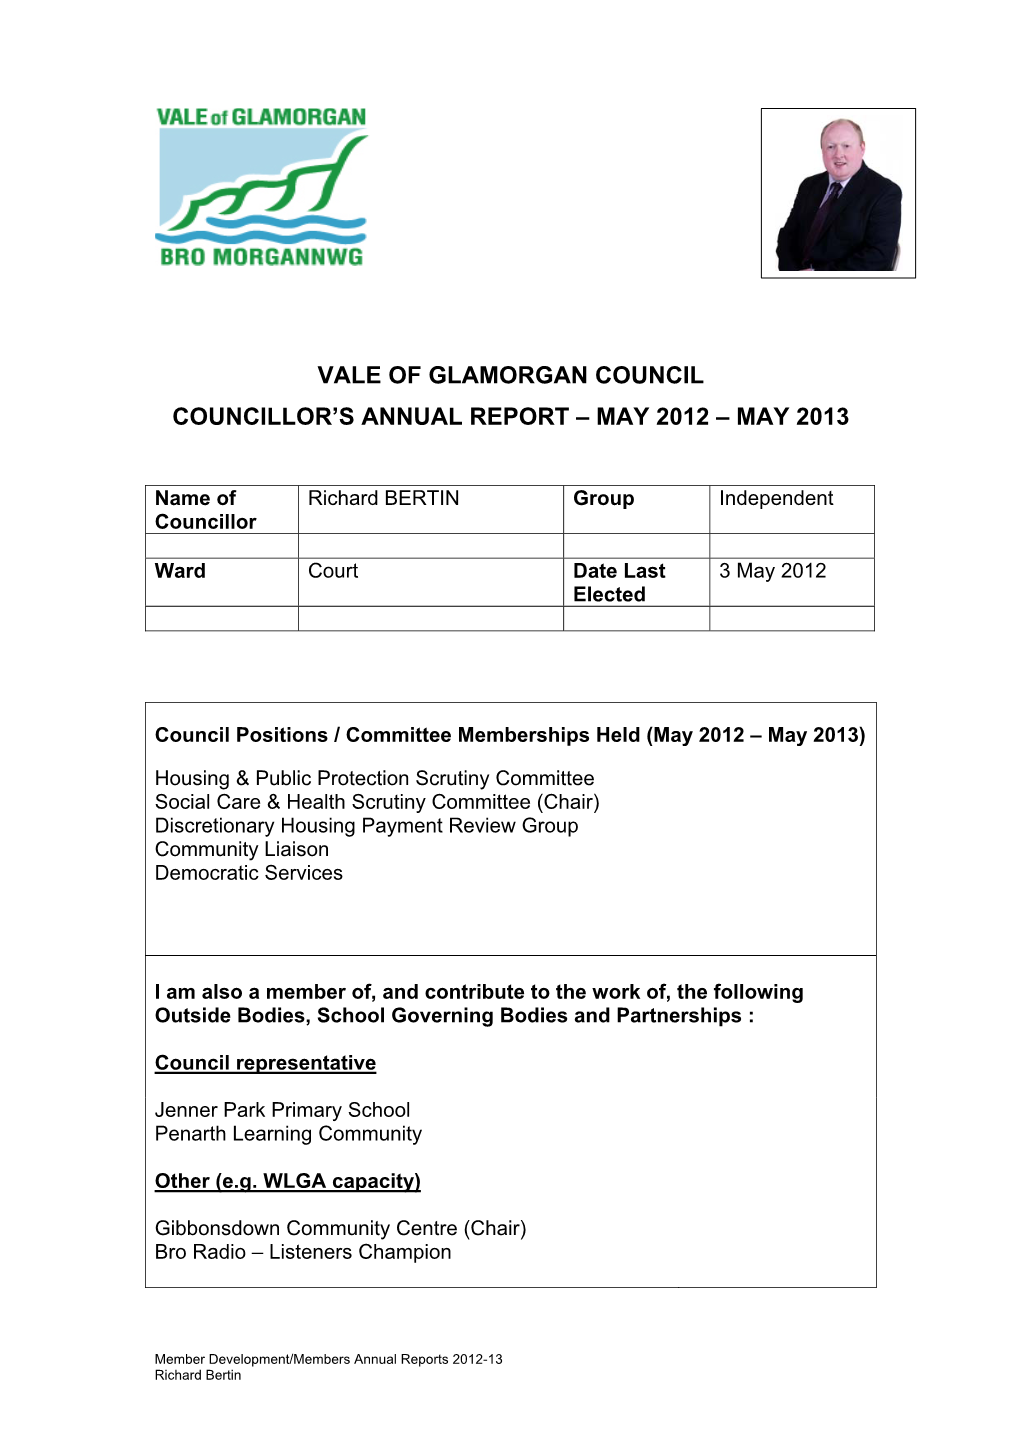 Vale of Glamorgan Council Councillor's Annual Report